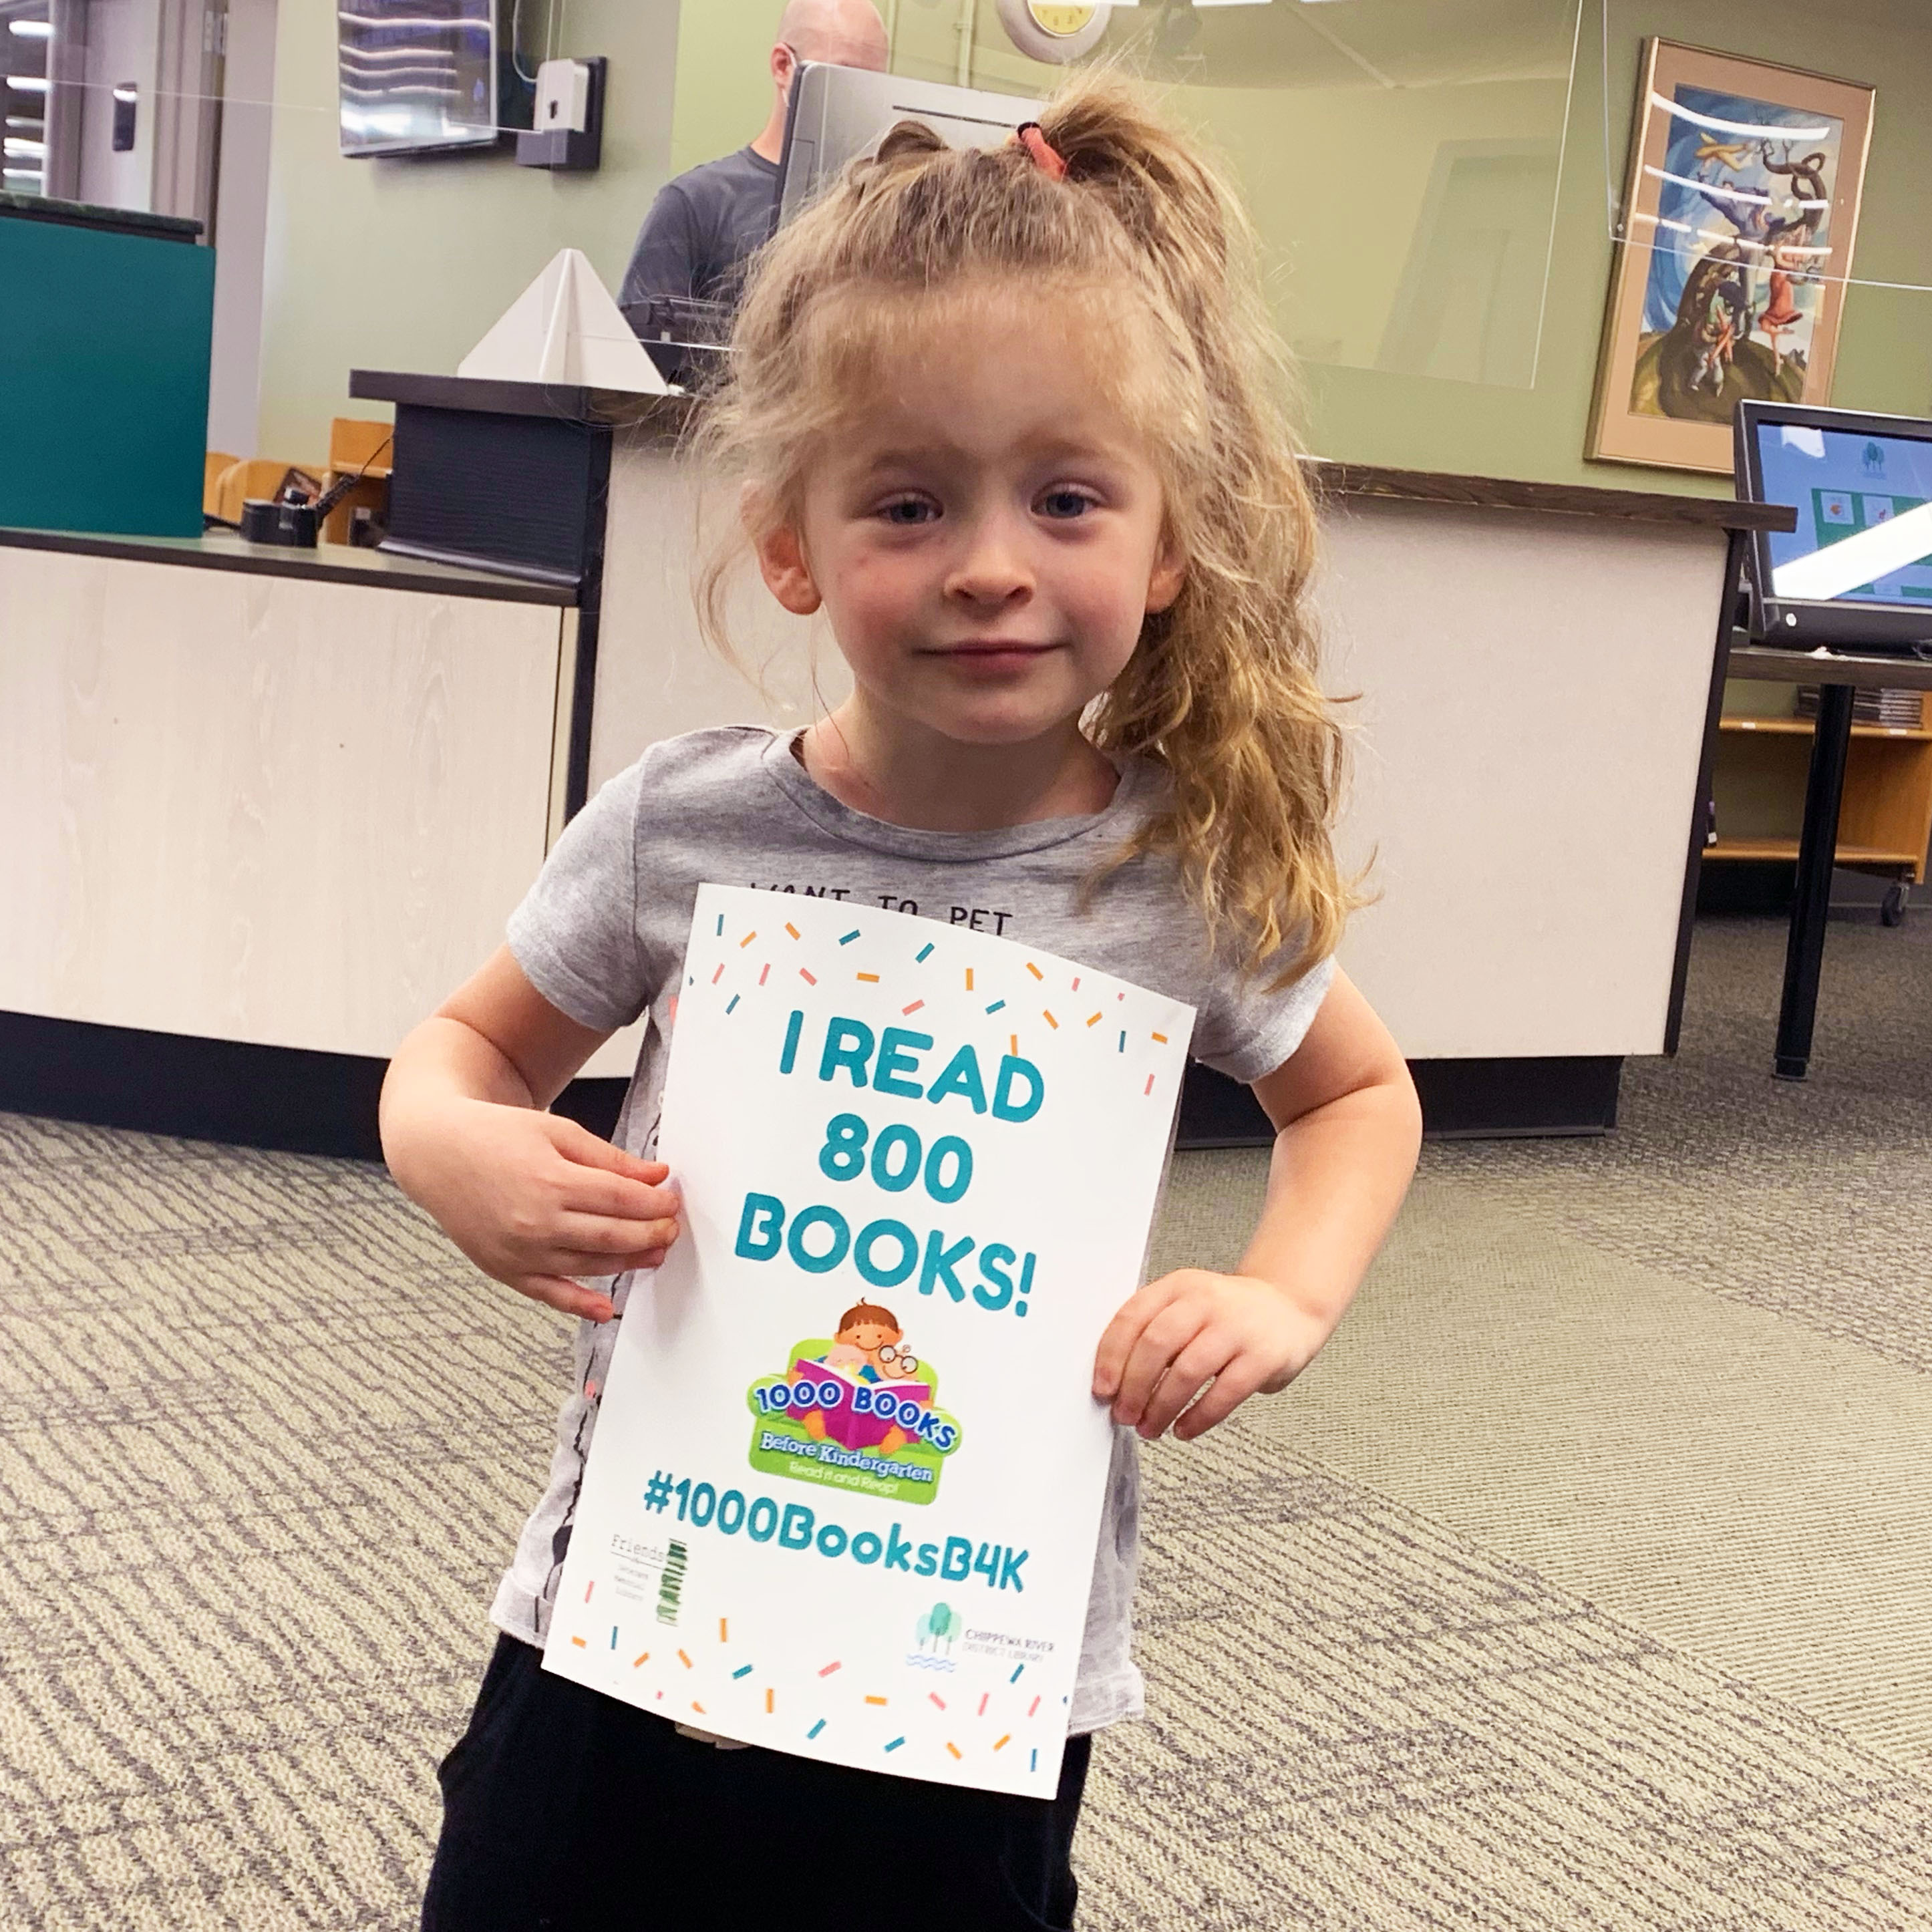 Young girl holding "I read 800 books sign."